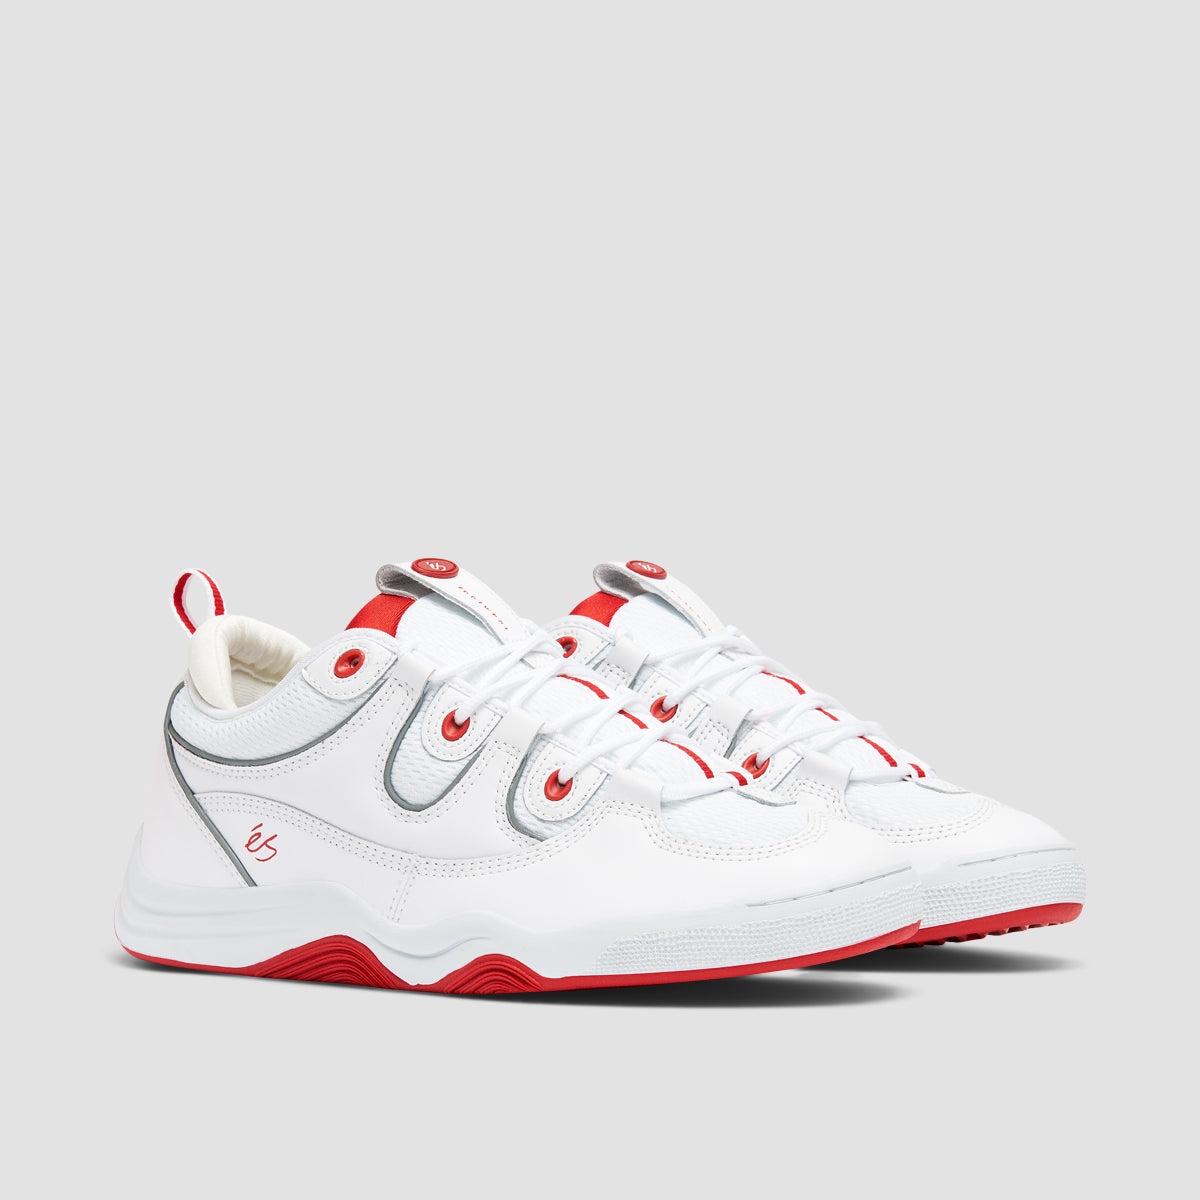 eS Two Nine 8 Shoes - White/Red